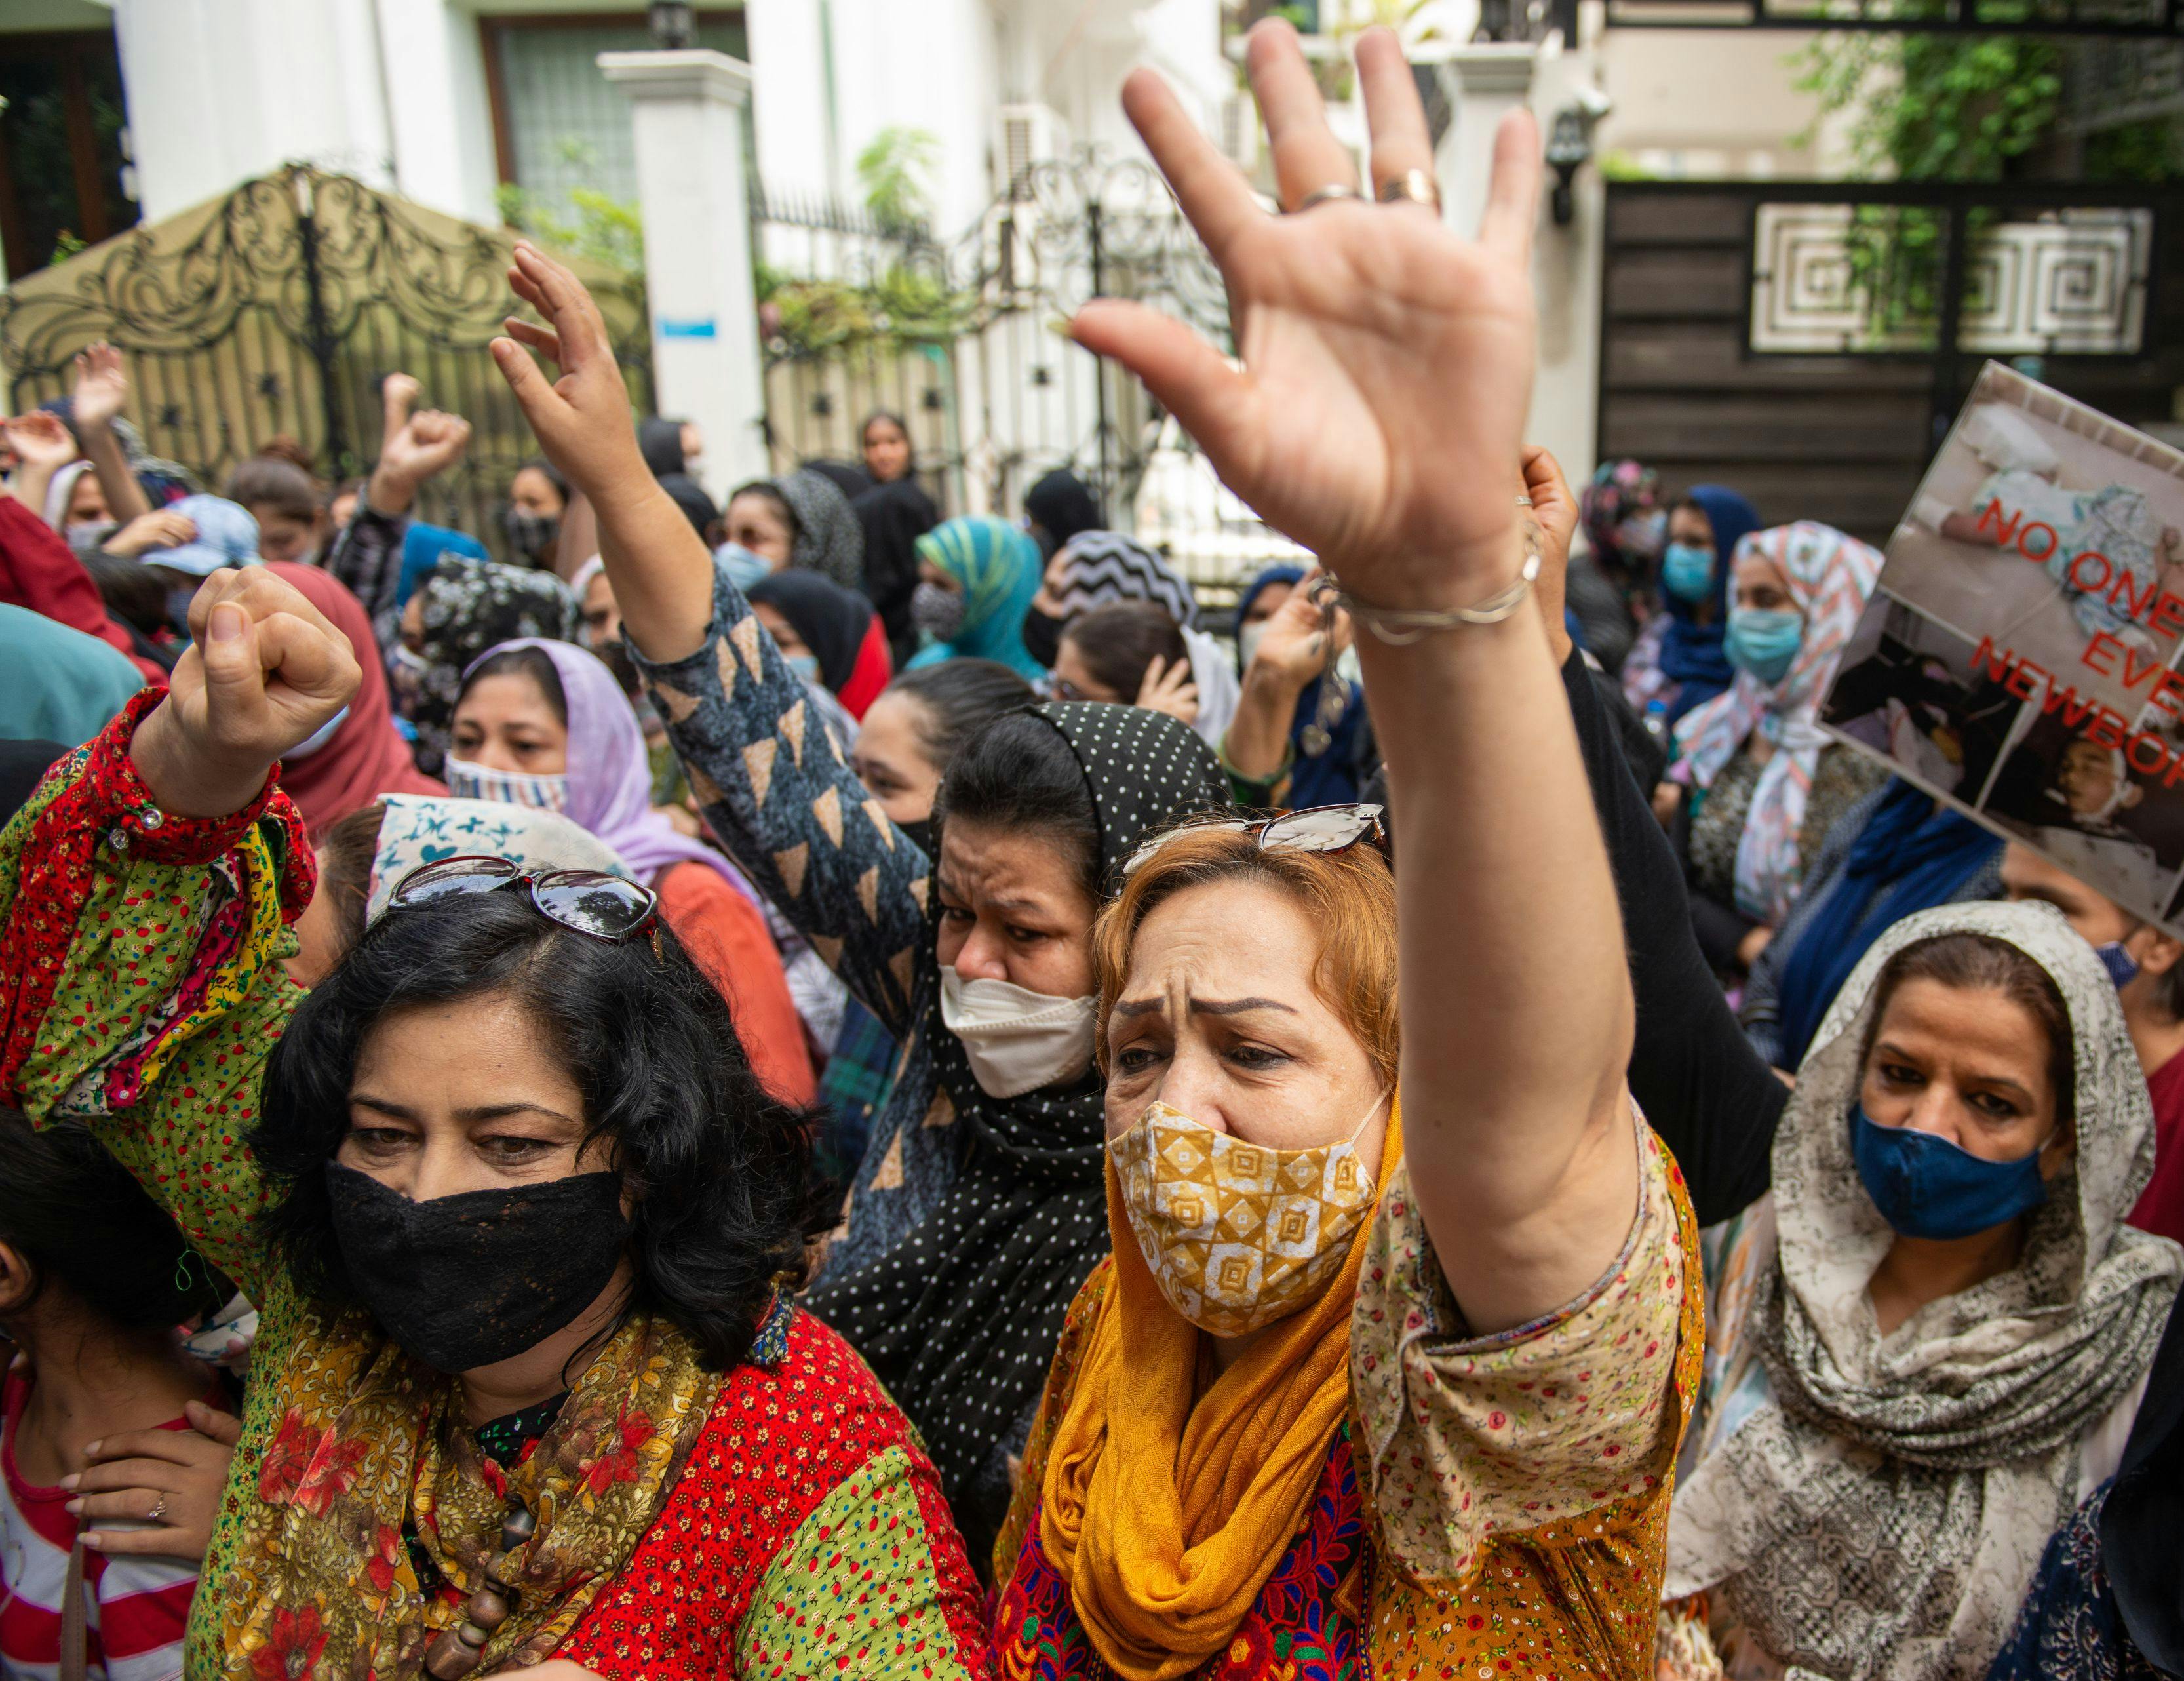 A group of women protesting in Pakistan.